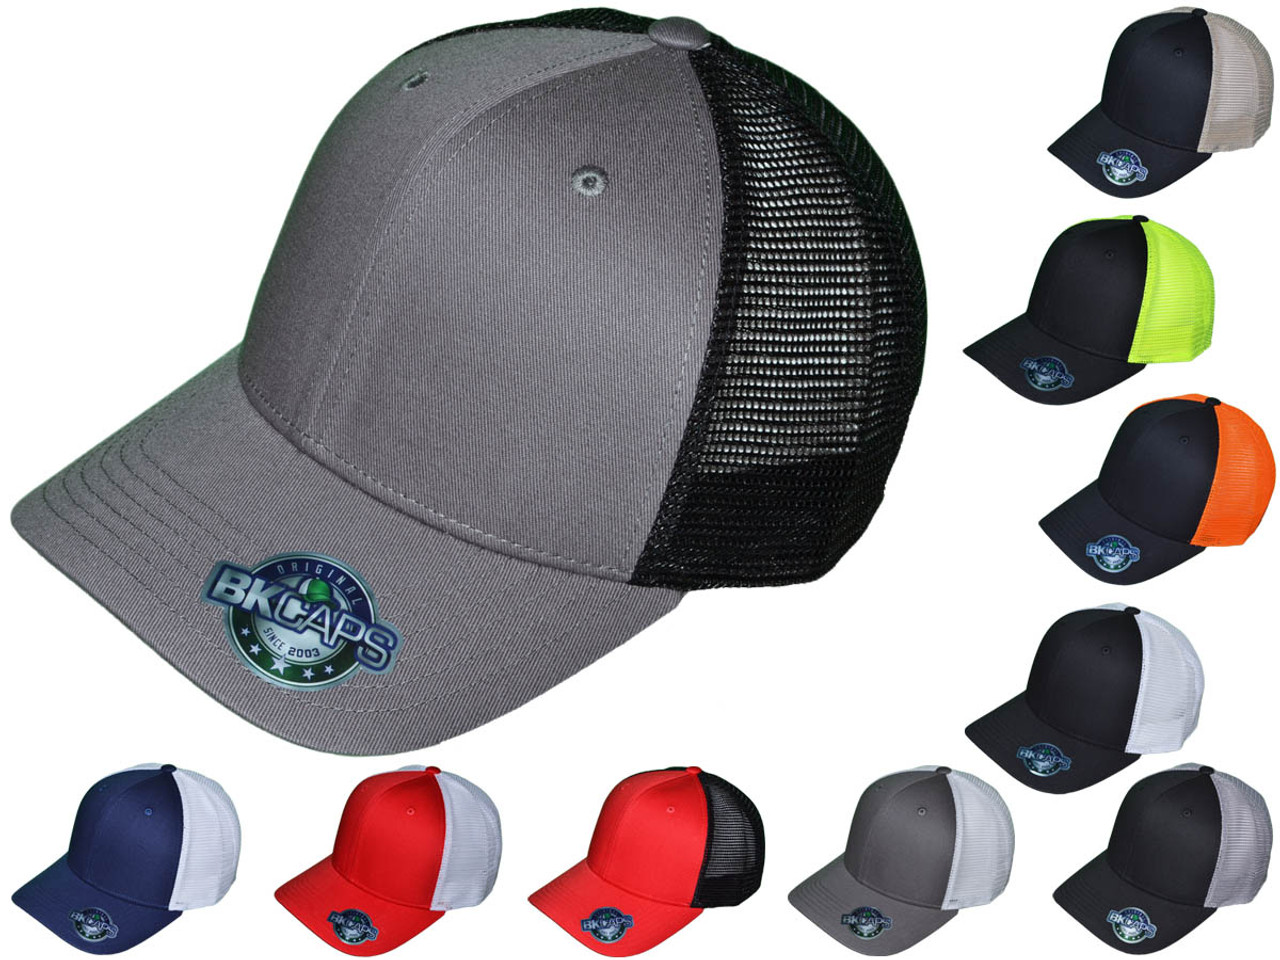 Blank Trucker Hats - 6 Panel Cotton Mid Profile Two-Tone Structured Snapback Caps (10 Colors) - 5312